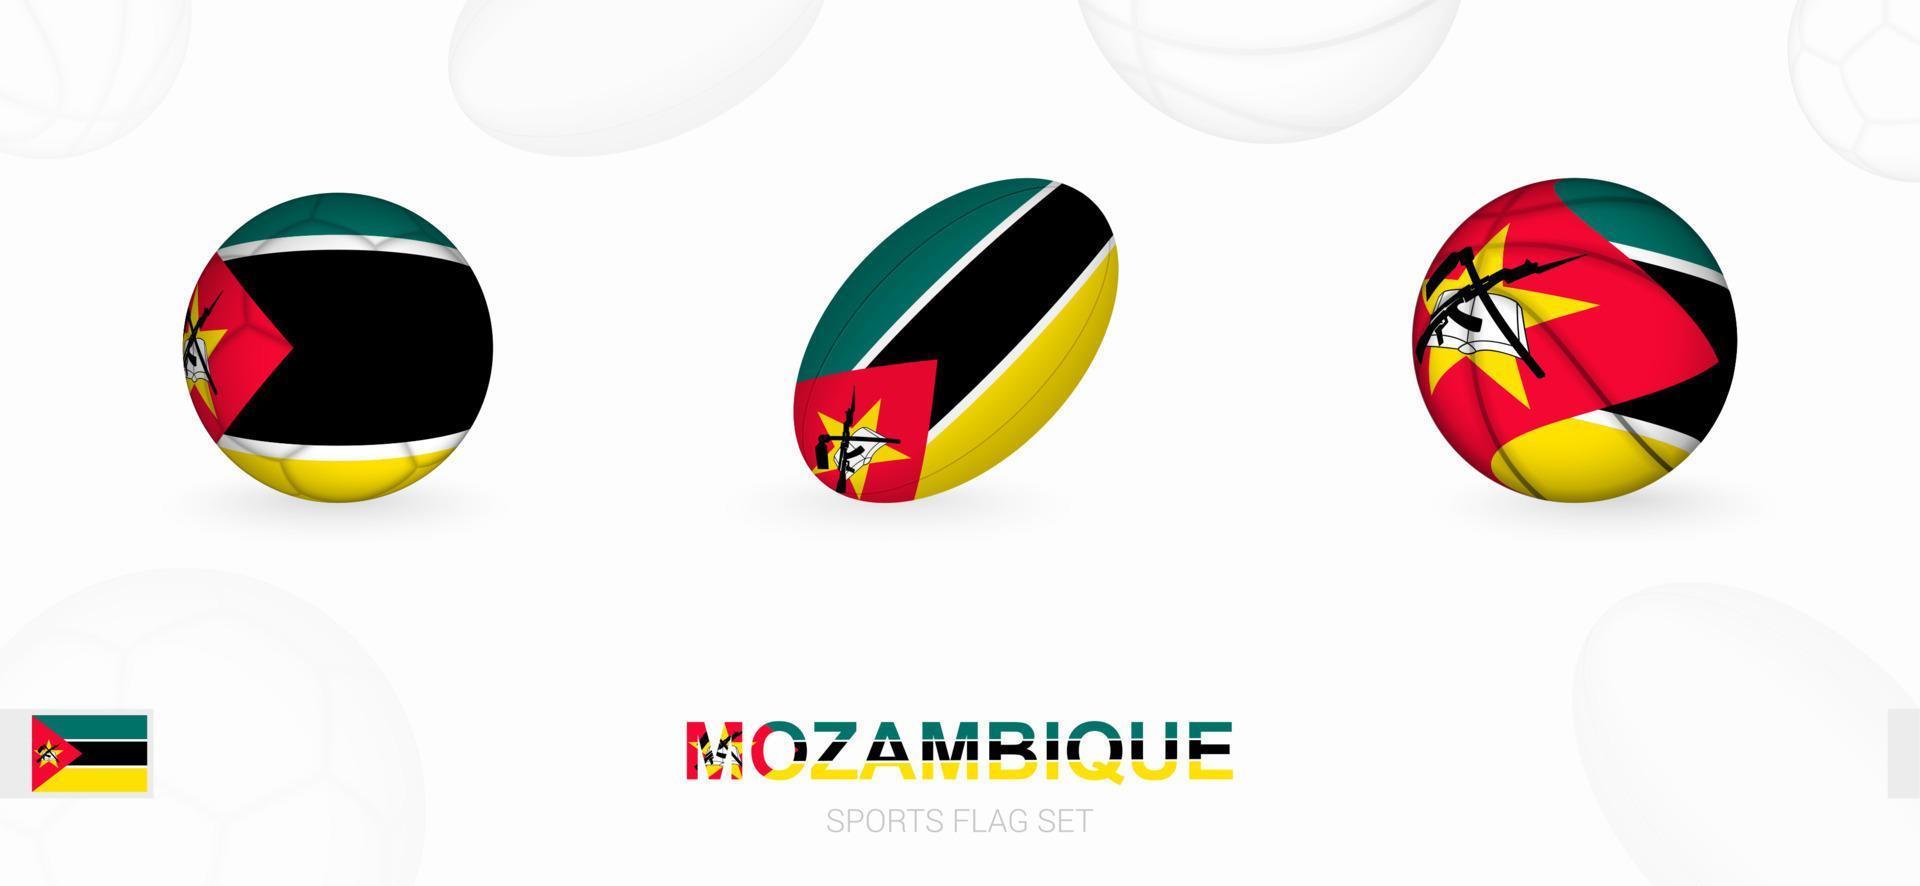 Sports icons for football, rugby and basketball with the flag of Mozambique. vector